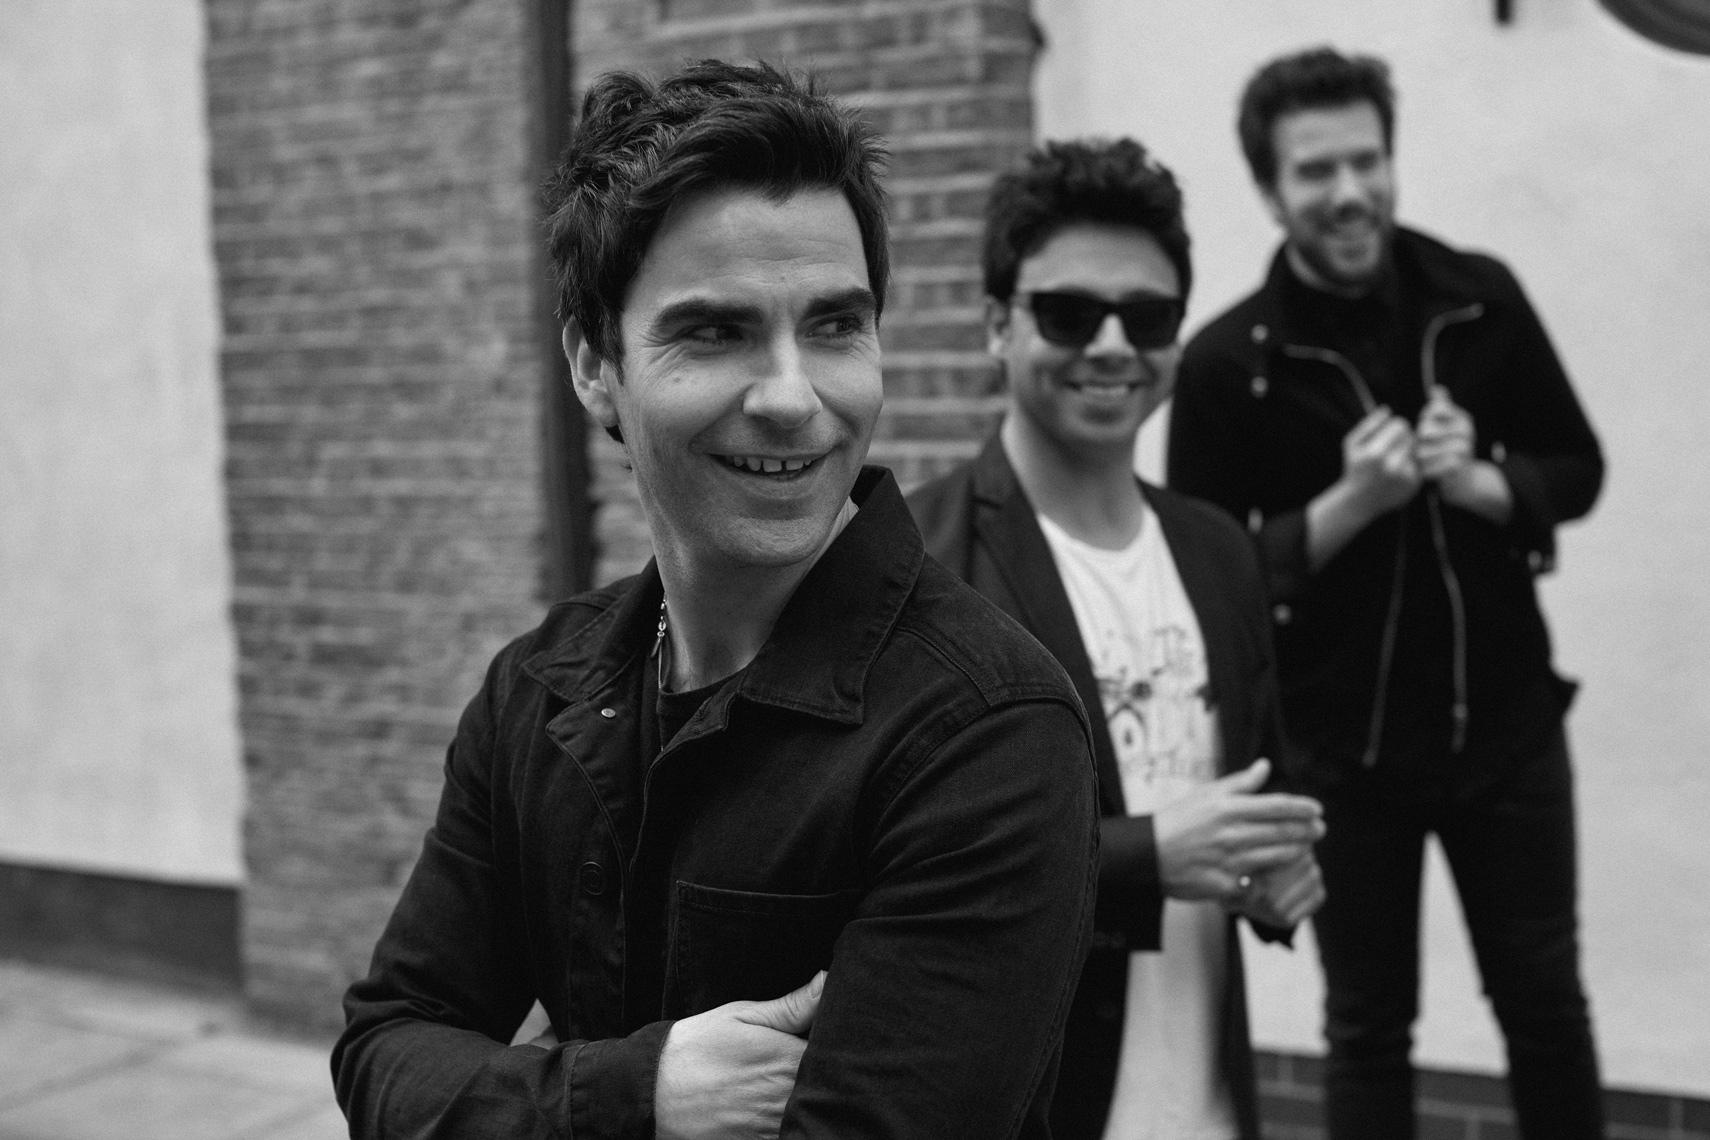 Stereophonics photographed by Tom Oxley